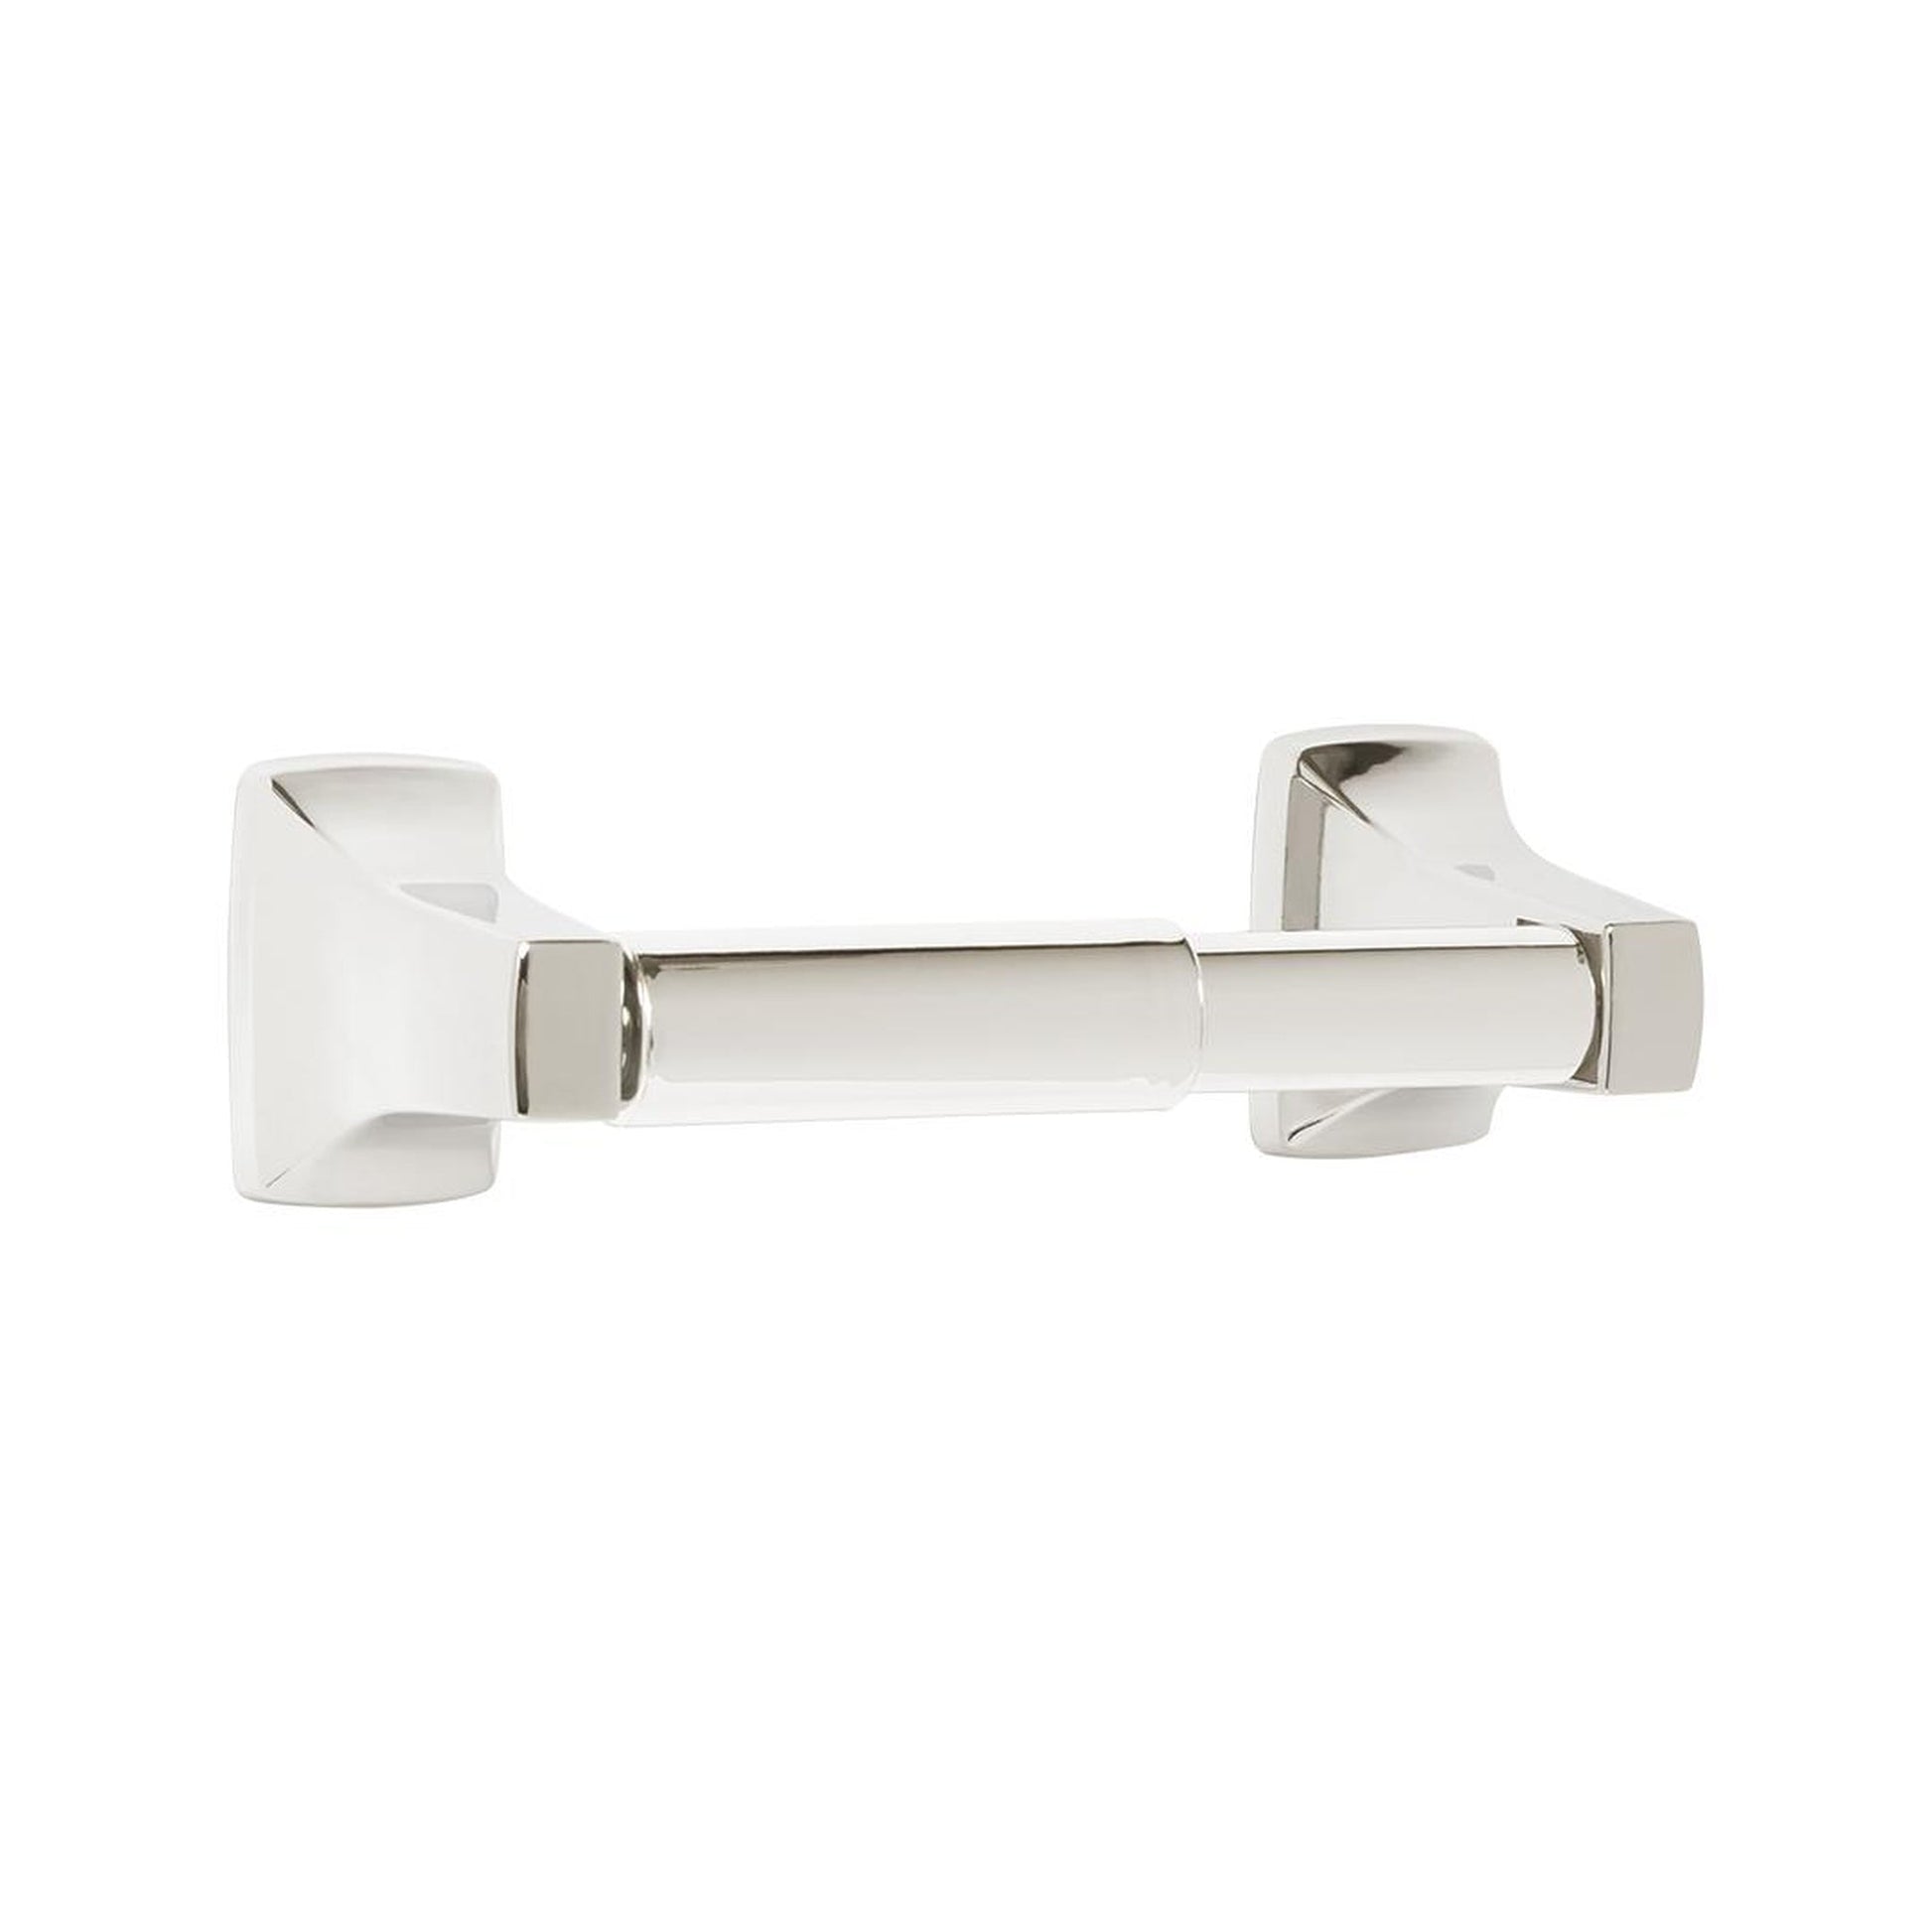 Seachrome Contemporary Series 7" x 3" Die Cast Zinc Alloy Single Toilet Paper Holder With Plastic Spring Chrome Roller